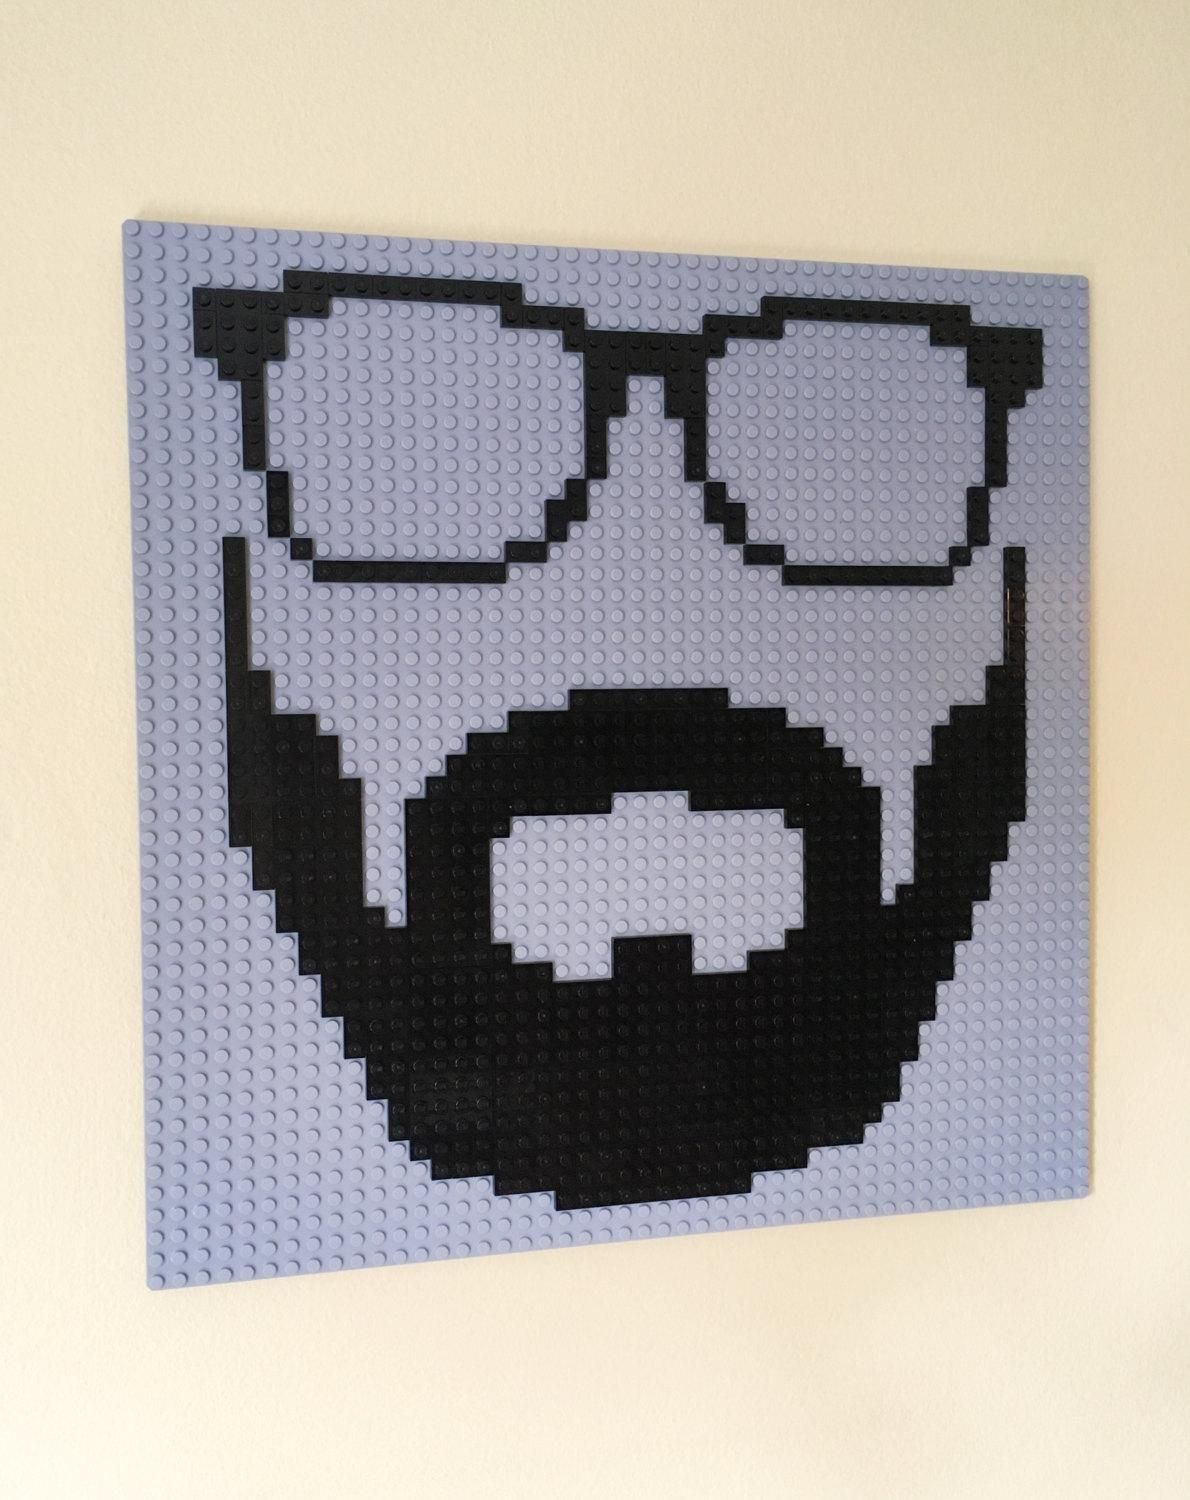 Hipster Lego® Wall Art Glasses Beard Dapper Hanging Picture Pertaining To Pixel Mosaic Wall Art (View 12 of 20)